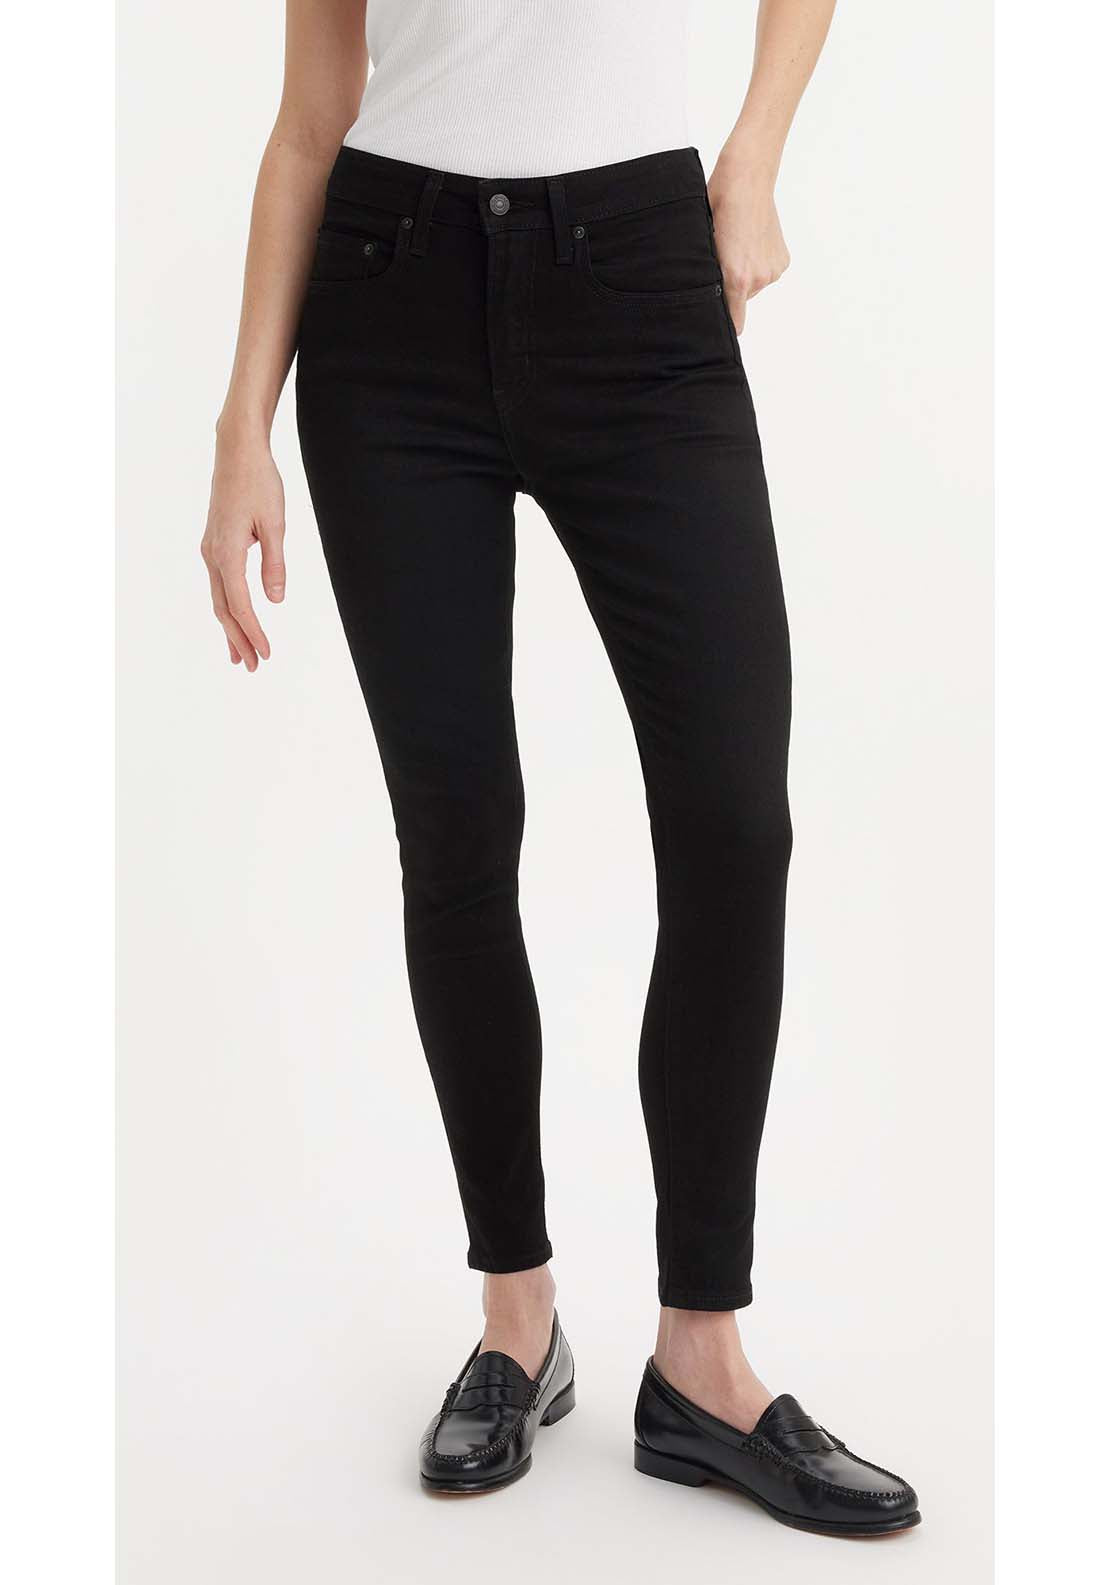 Levis 721 High Rise Skinny Jean 4 Shaws Department Stores